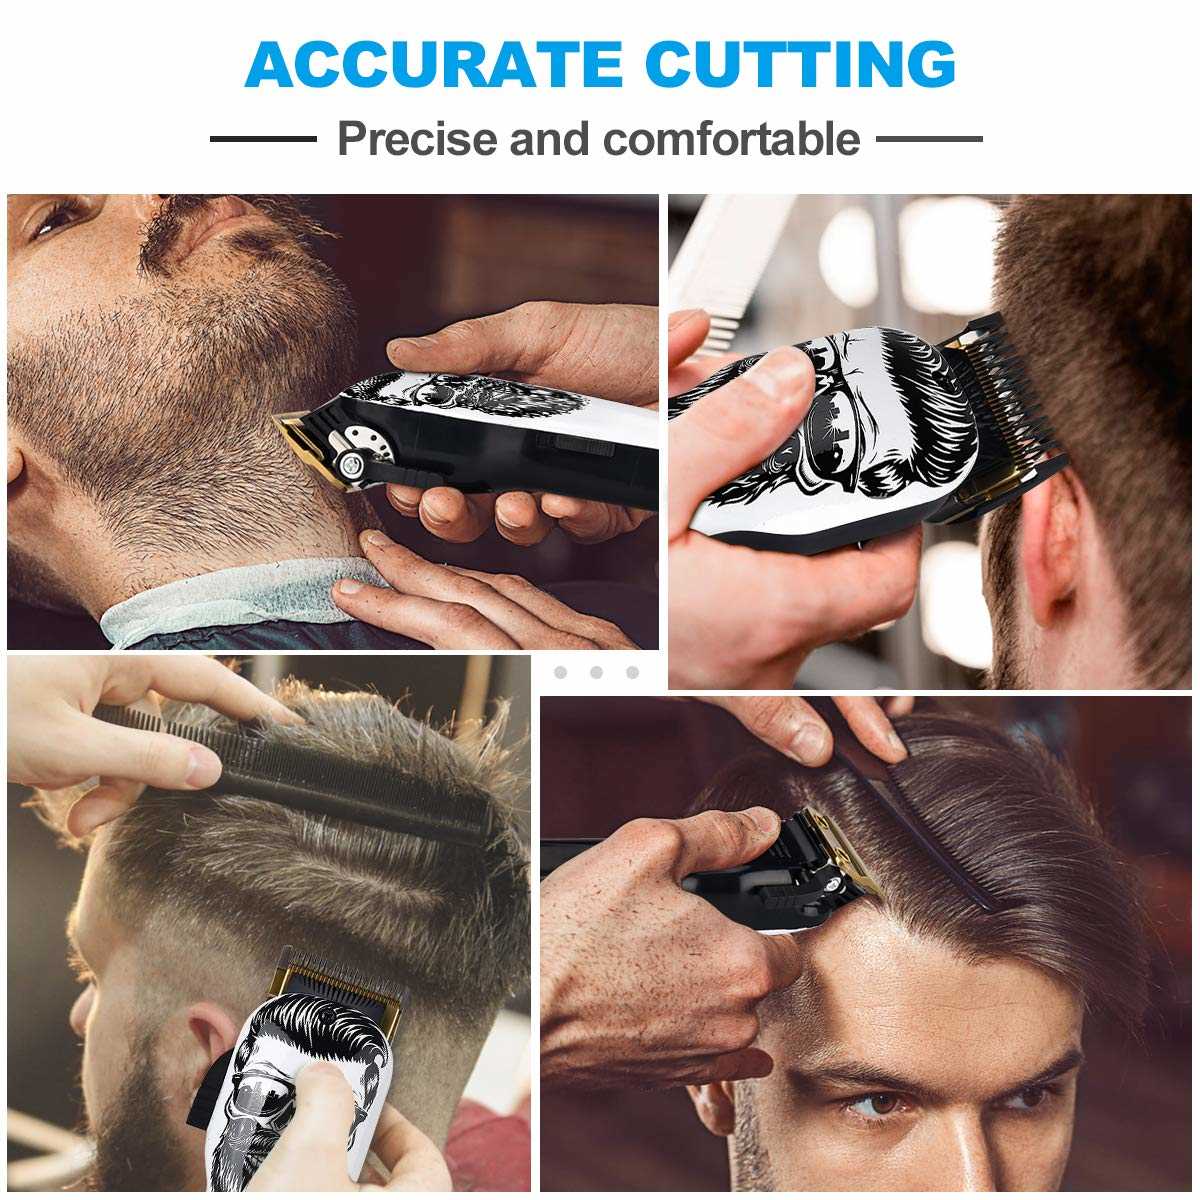 Upgraded Cordless Electric Hair Clippers - 6 